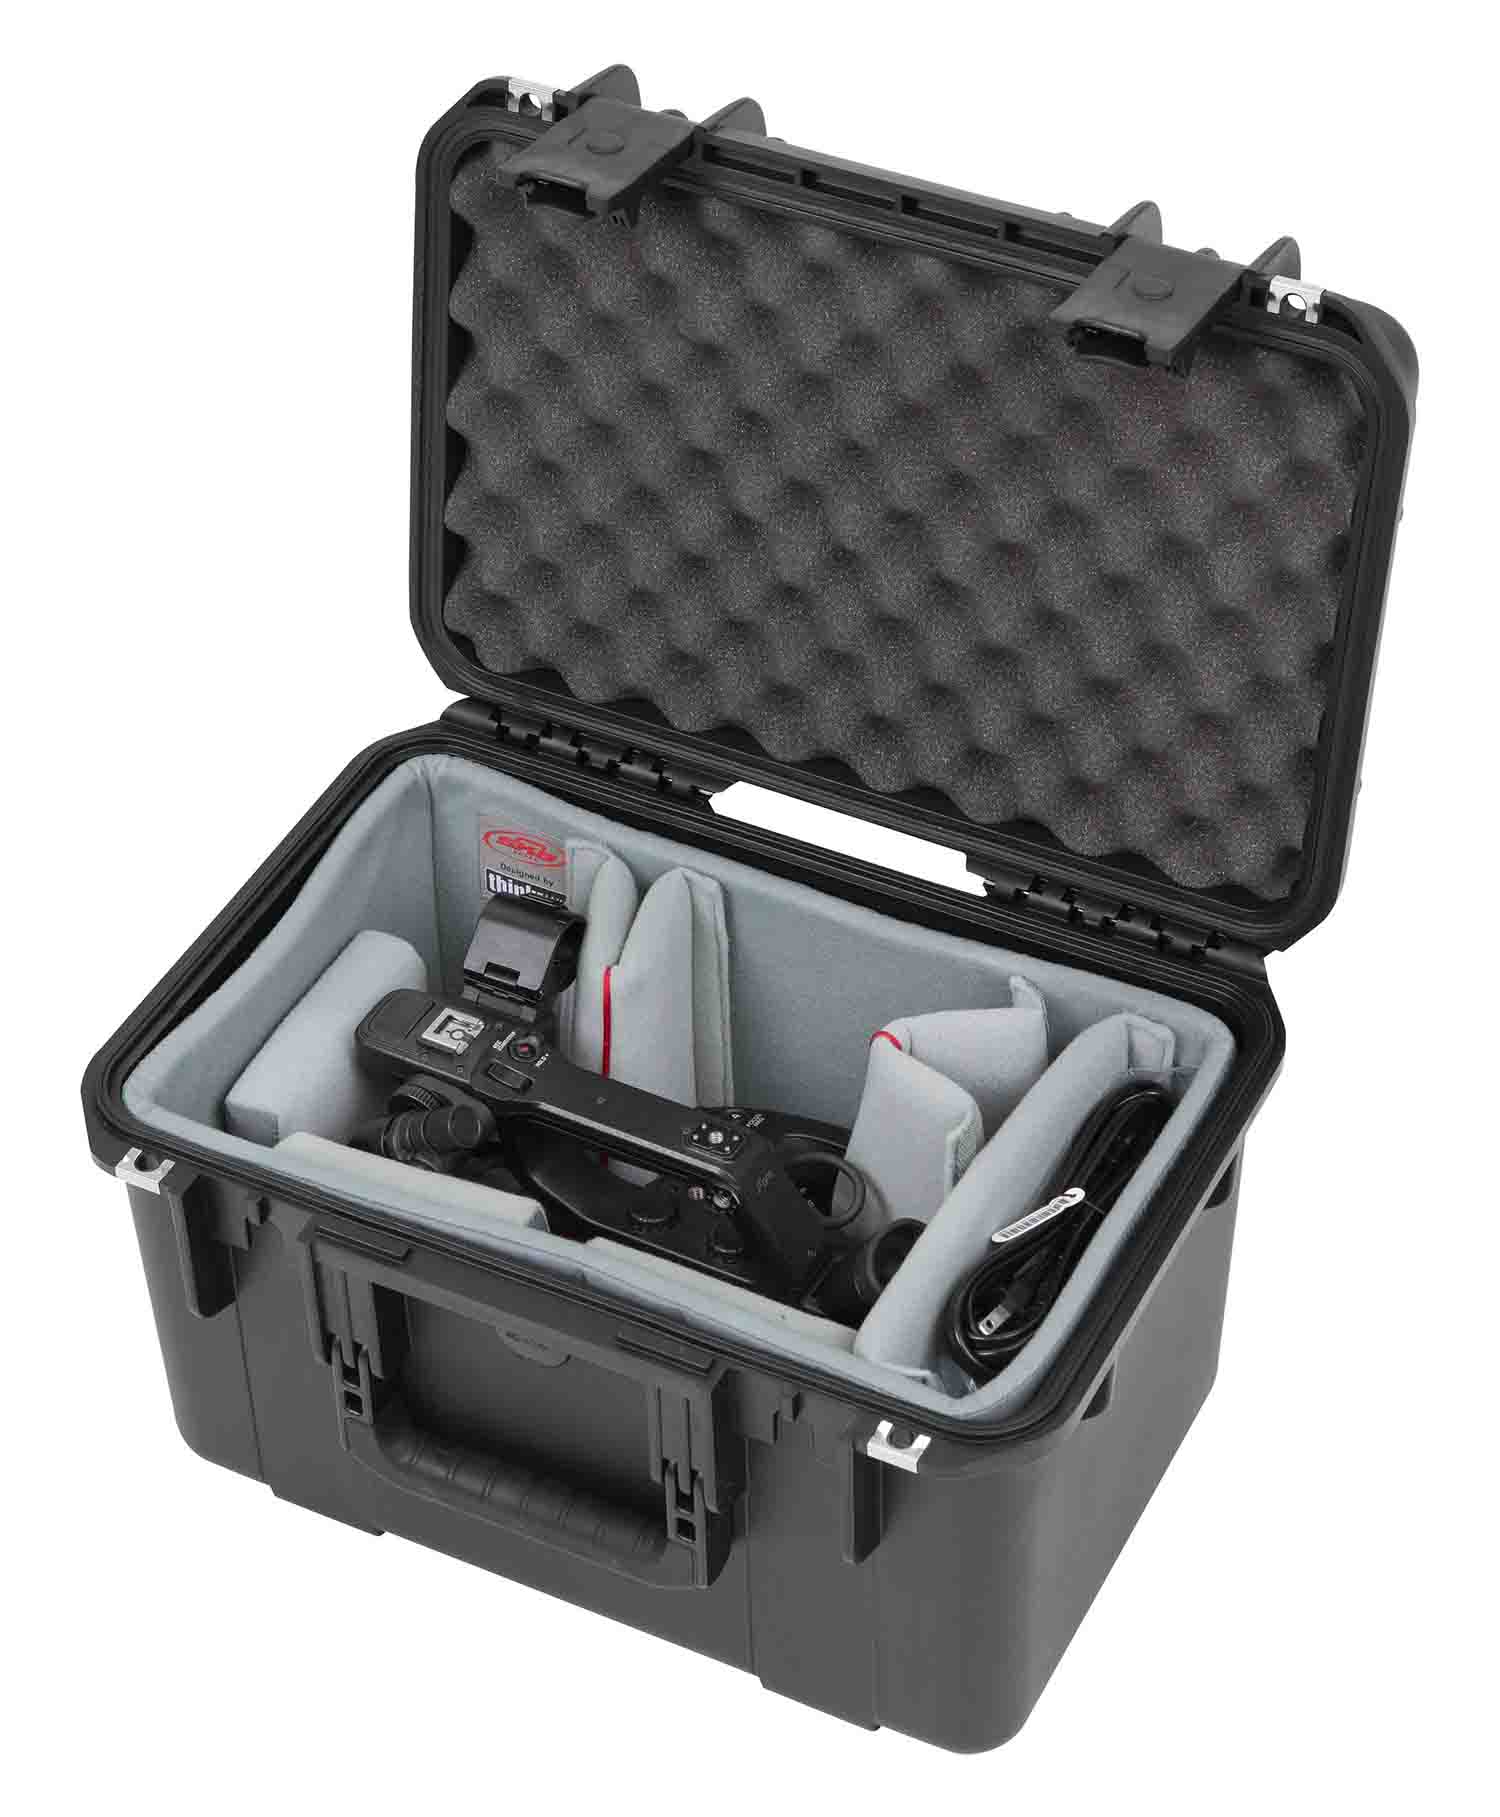 SKB Cases 3i-1610-10DT Waterproof Case with Video Dividers and Lid Foam - Black - Hollywood DJ